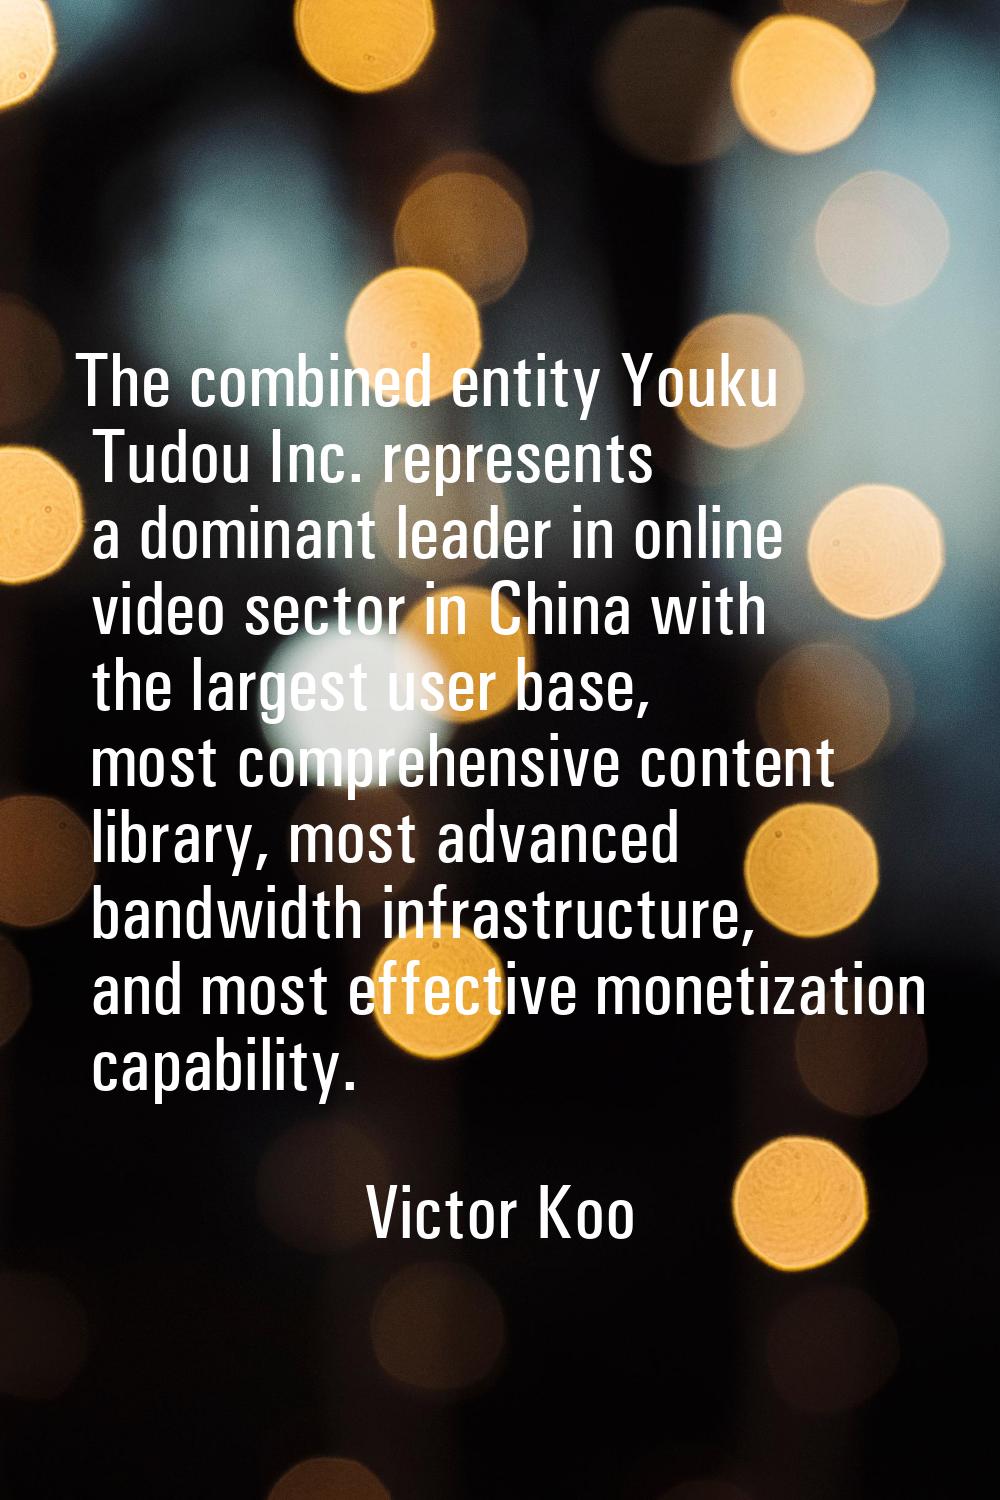 The combined entity Youku Tudou Inc. represents a dominant leader in online video sector in China w